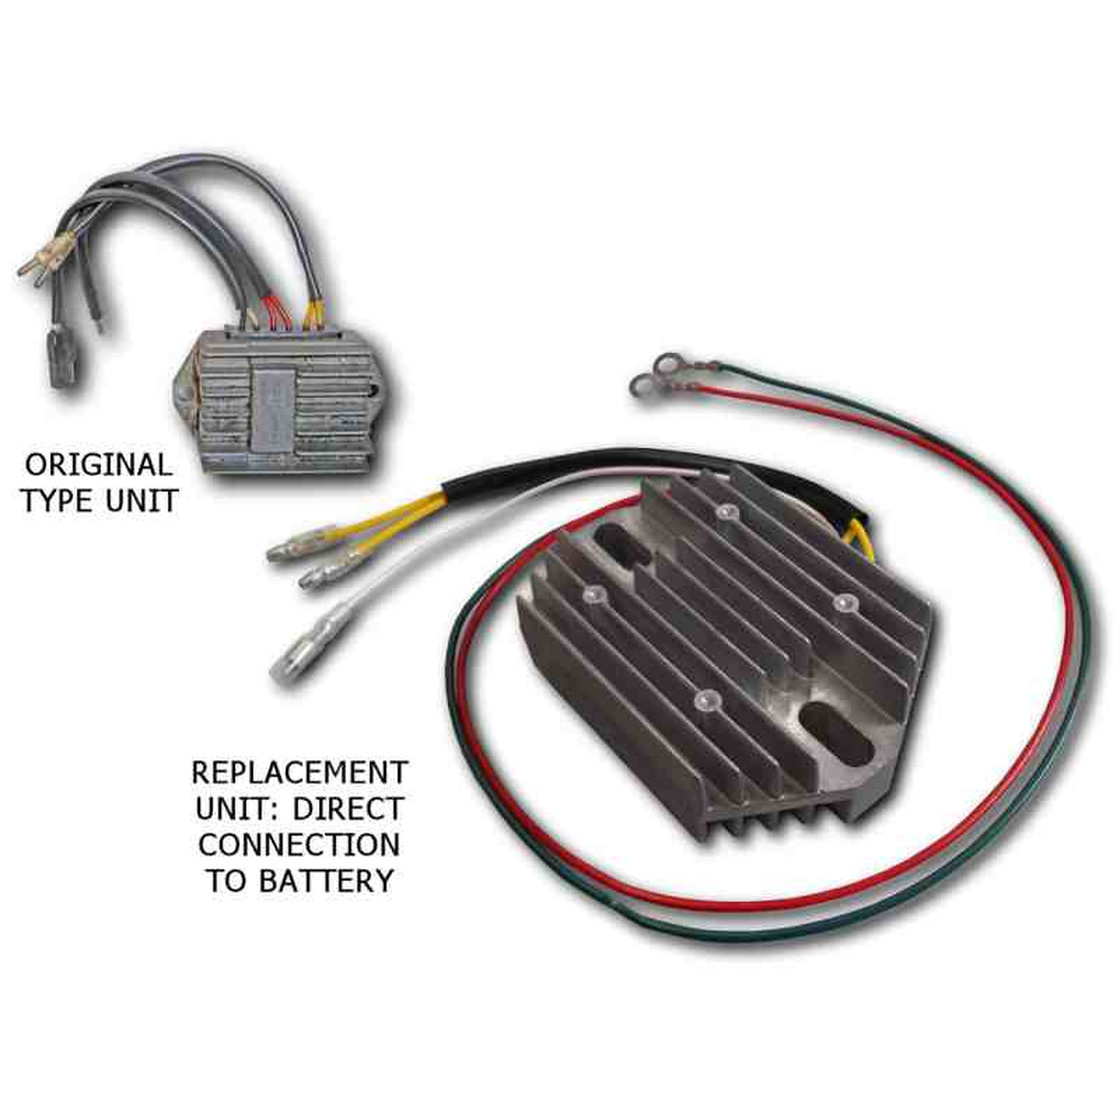 Conect Two Pin to Starter Rele Bmw Regulator Rectifier Regulator Rectifier Ducati Bikes Laverda Cagiva 650 Elefant 8000.67.608 540.4.008.1a 699.2.082.1b 540.4.003.1a 699.2.084.1a … Of Conect Two Pin to Starter Rele Bmw